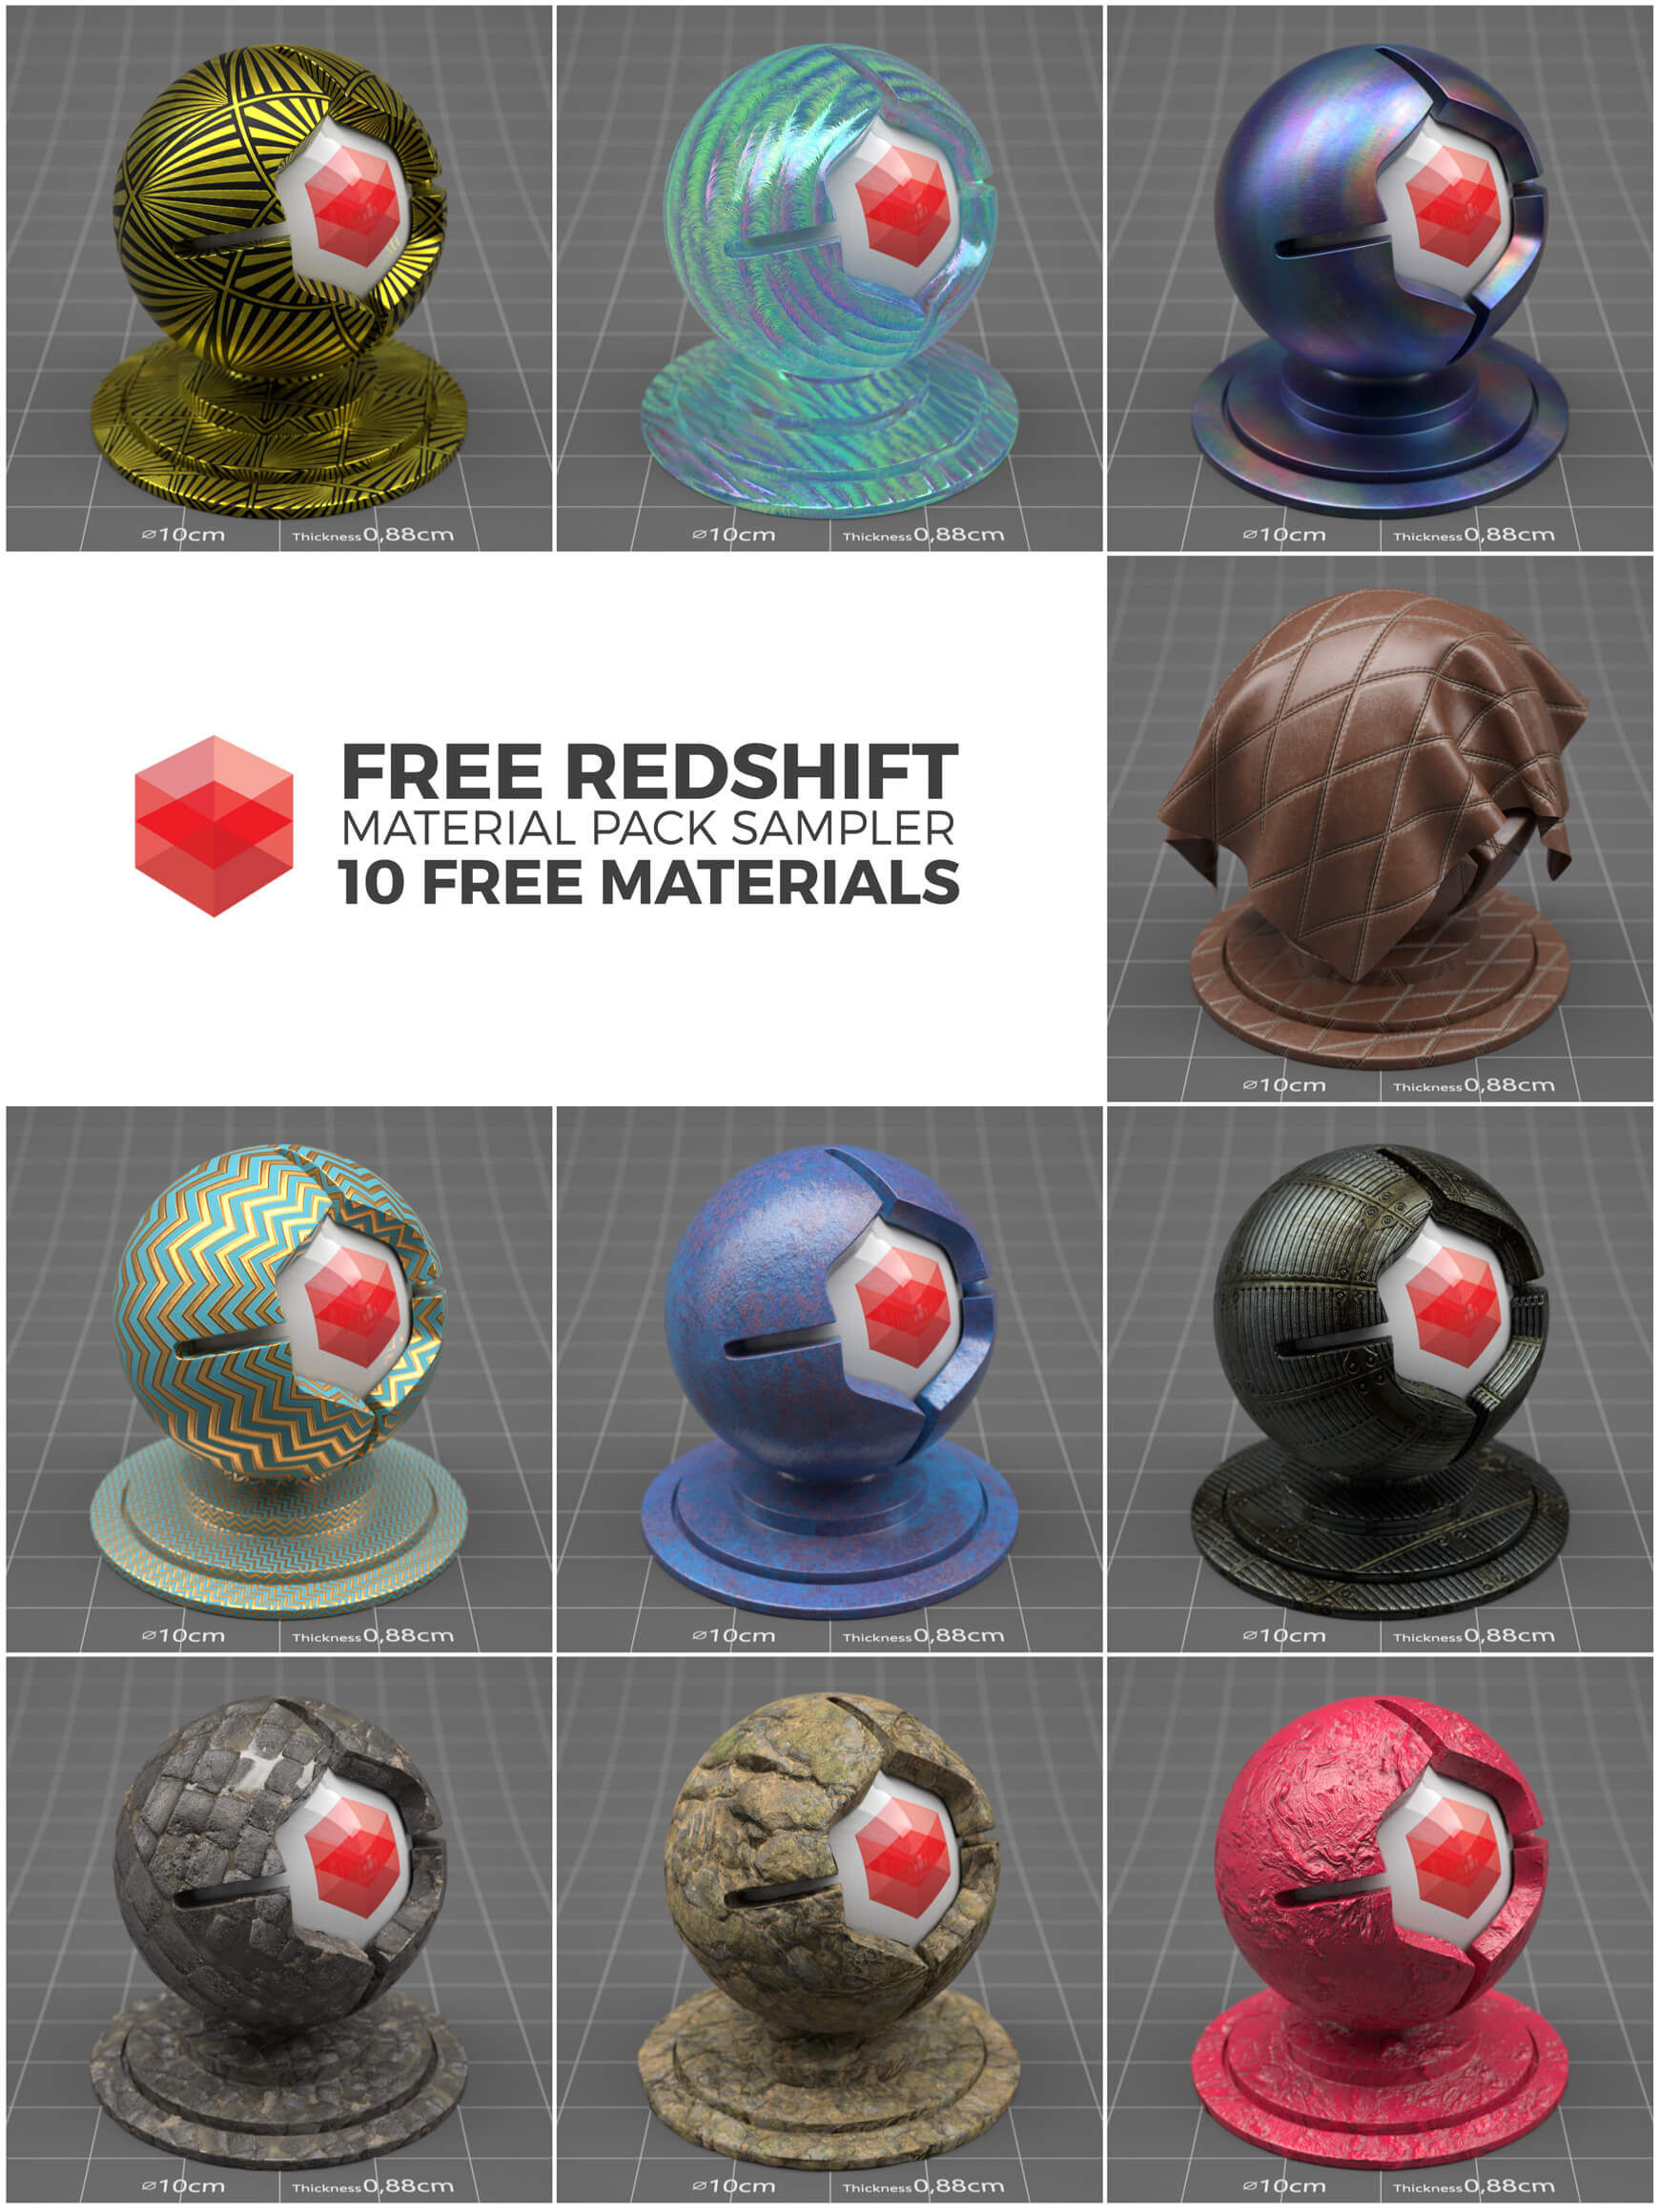 thepixellab - redshift c4d material pack